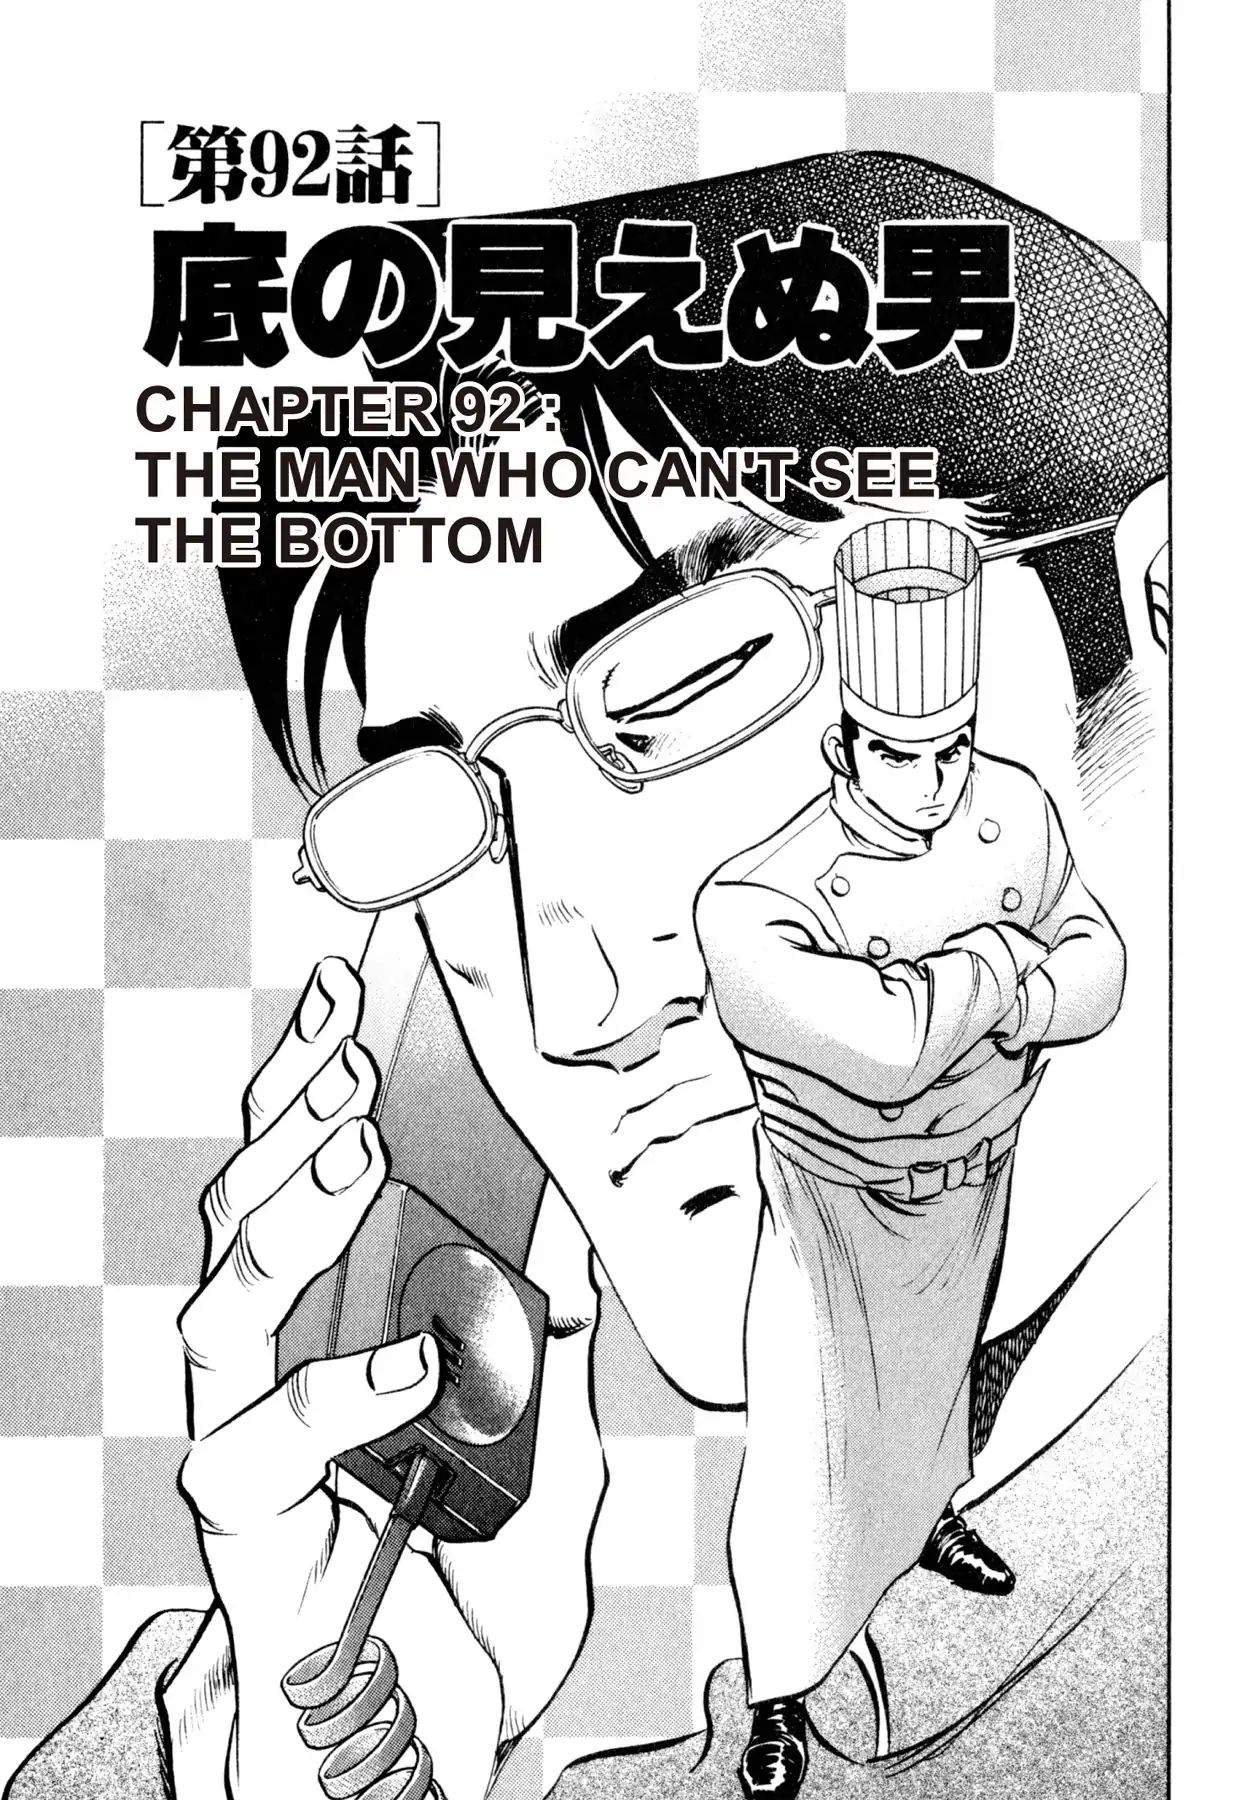 Shoku King VOL.11 CHAPTER 92: THE MAN WHO CAN'T SEE THE BOTTOM